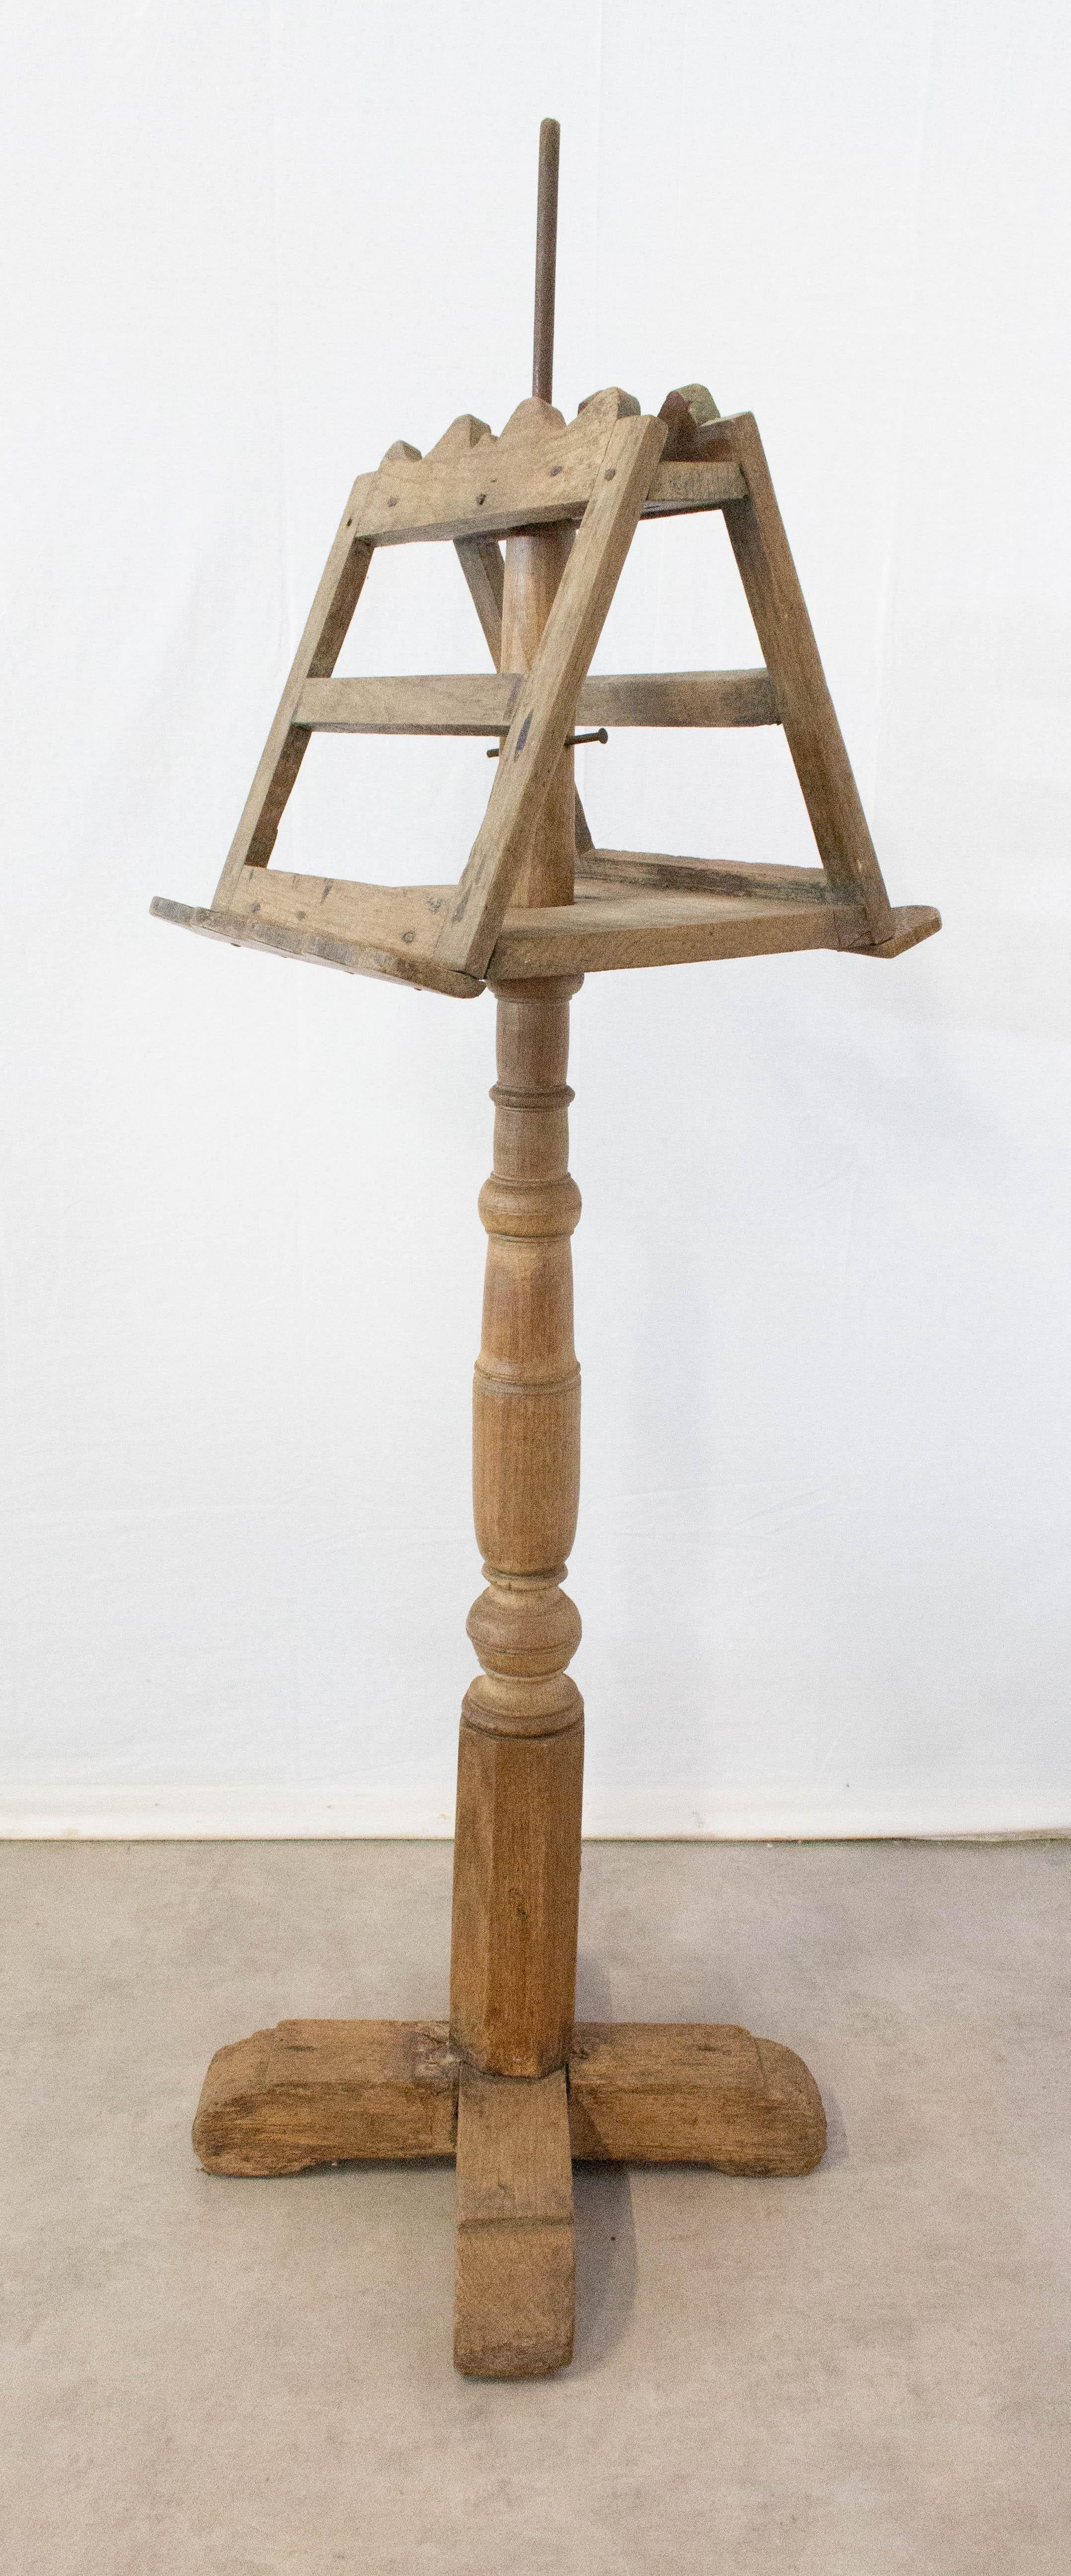 18th century wood music or book stand from France
The lectern is separable from its foot and can be placed on a piece of furniture.
Very good antique condition, marks of use, candle burns and superb patina,
with a only a few small old